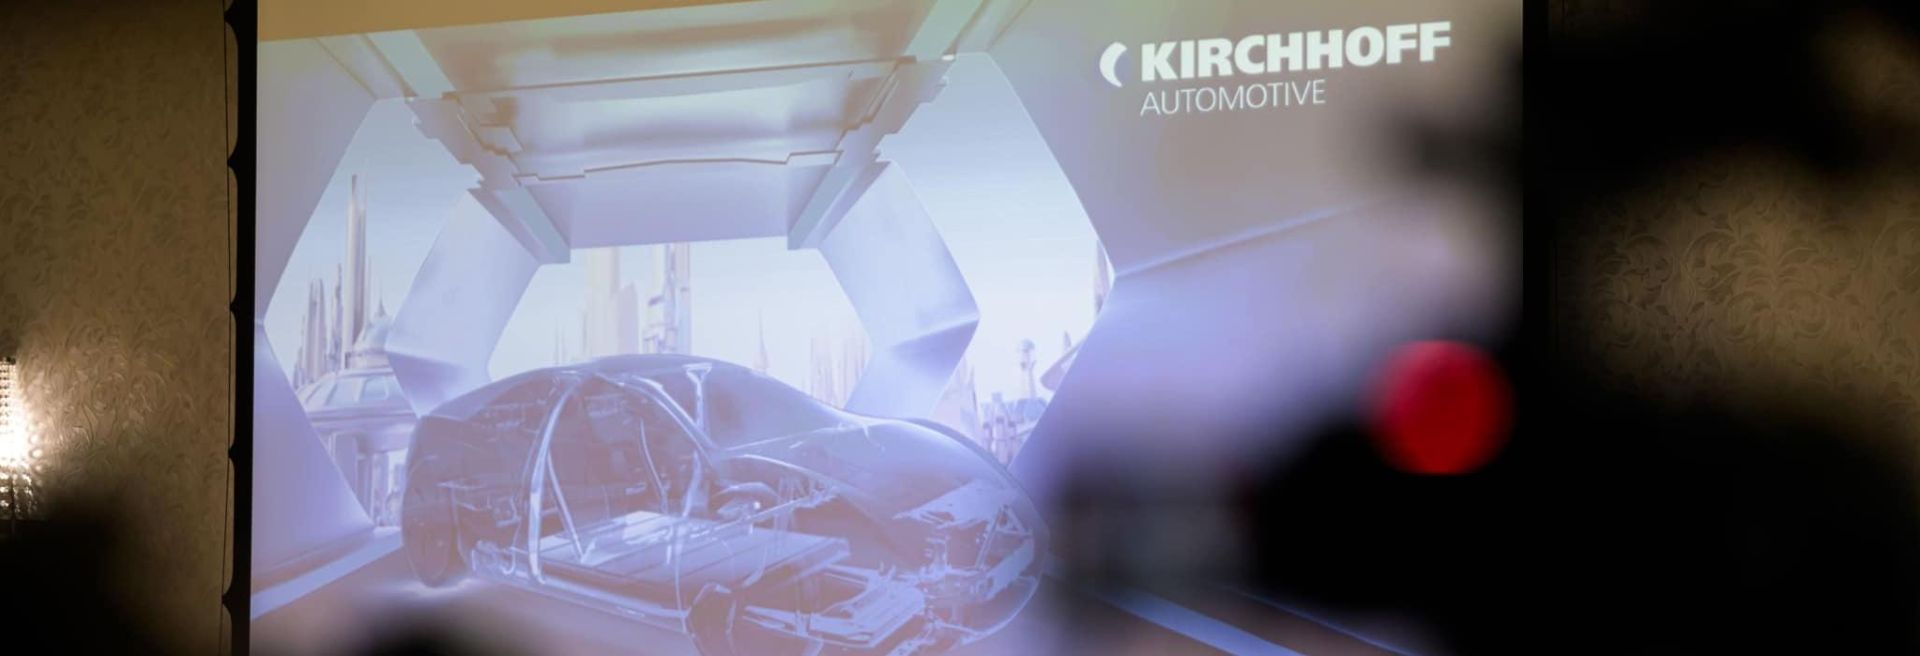 Kirchhoff Responds To Booming Demand By Setting Up New Production And Logistics Halls